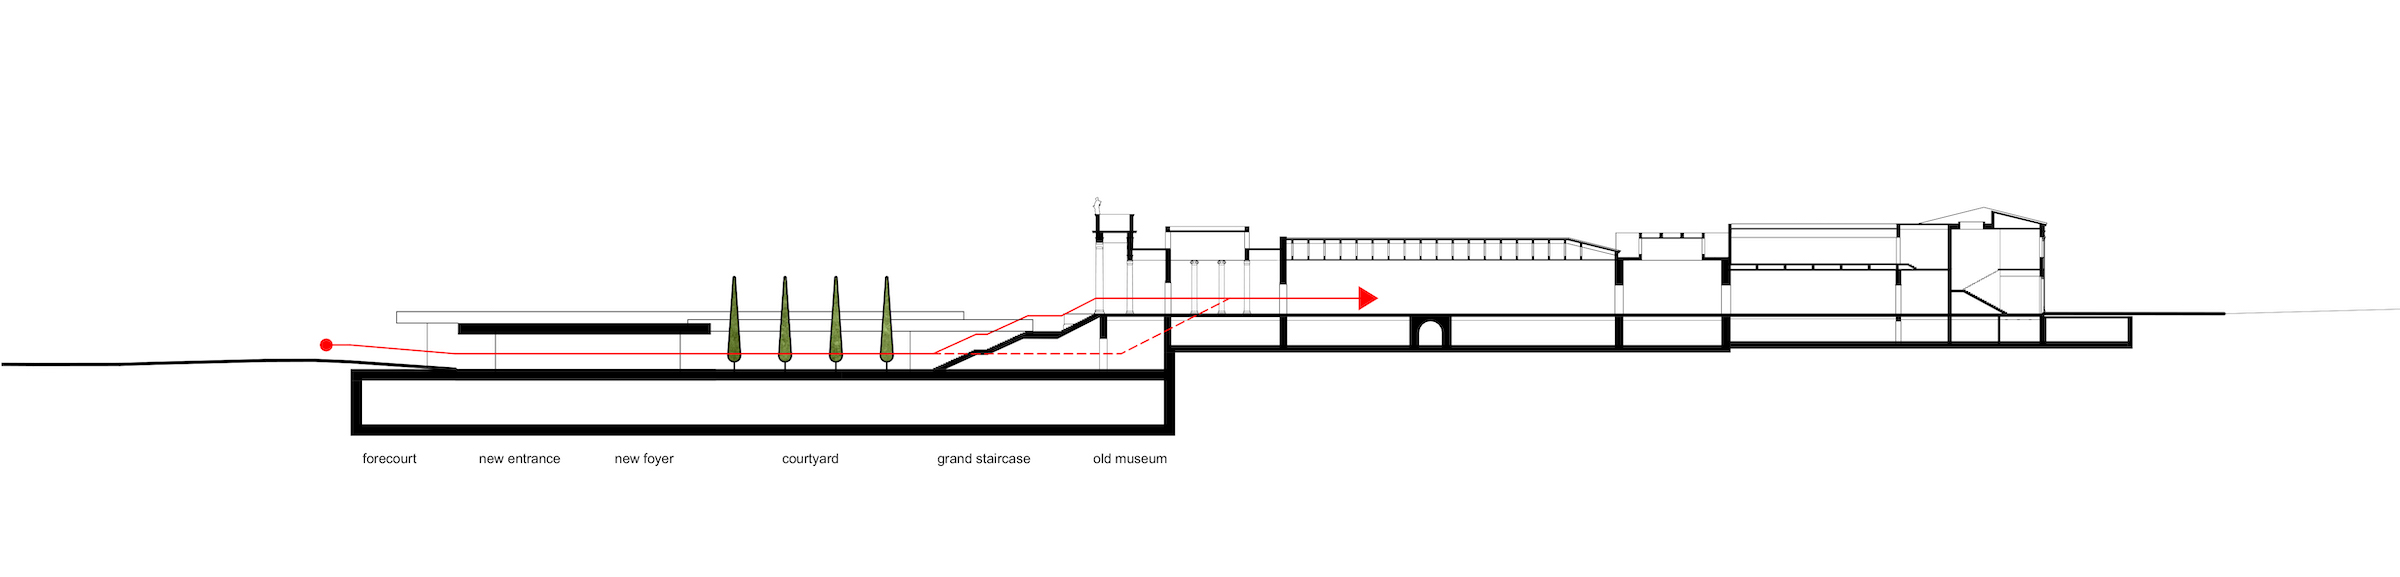 National Archaeological Museum Athens Schematic section David Chipperfield Architects